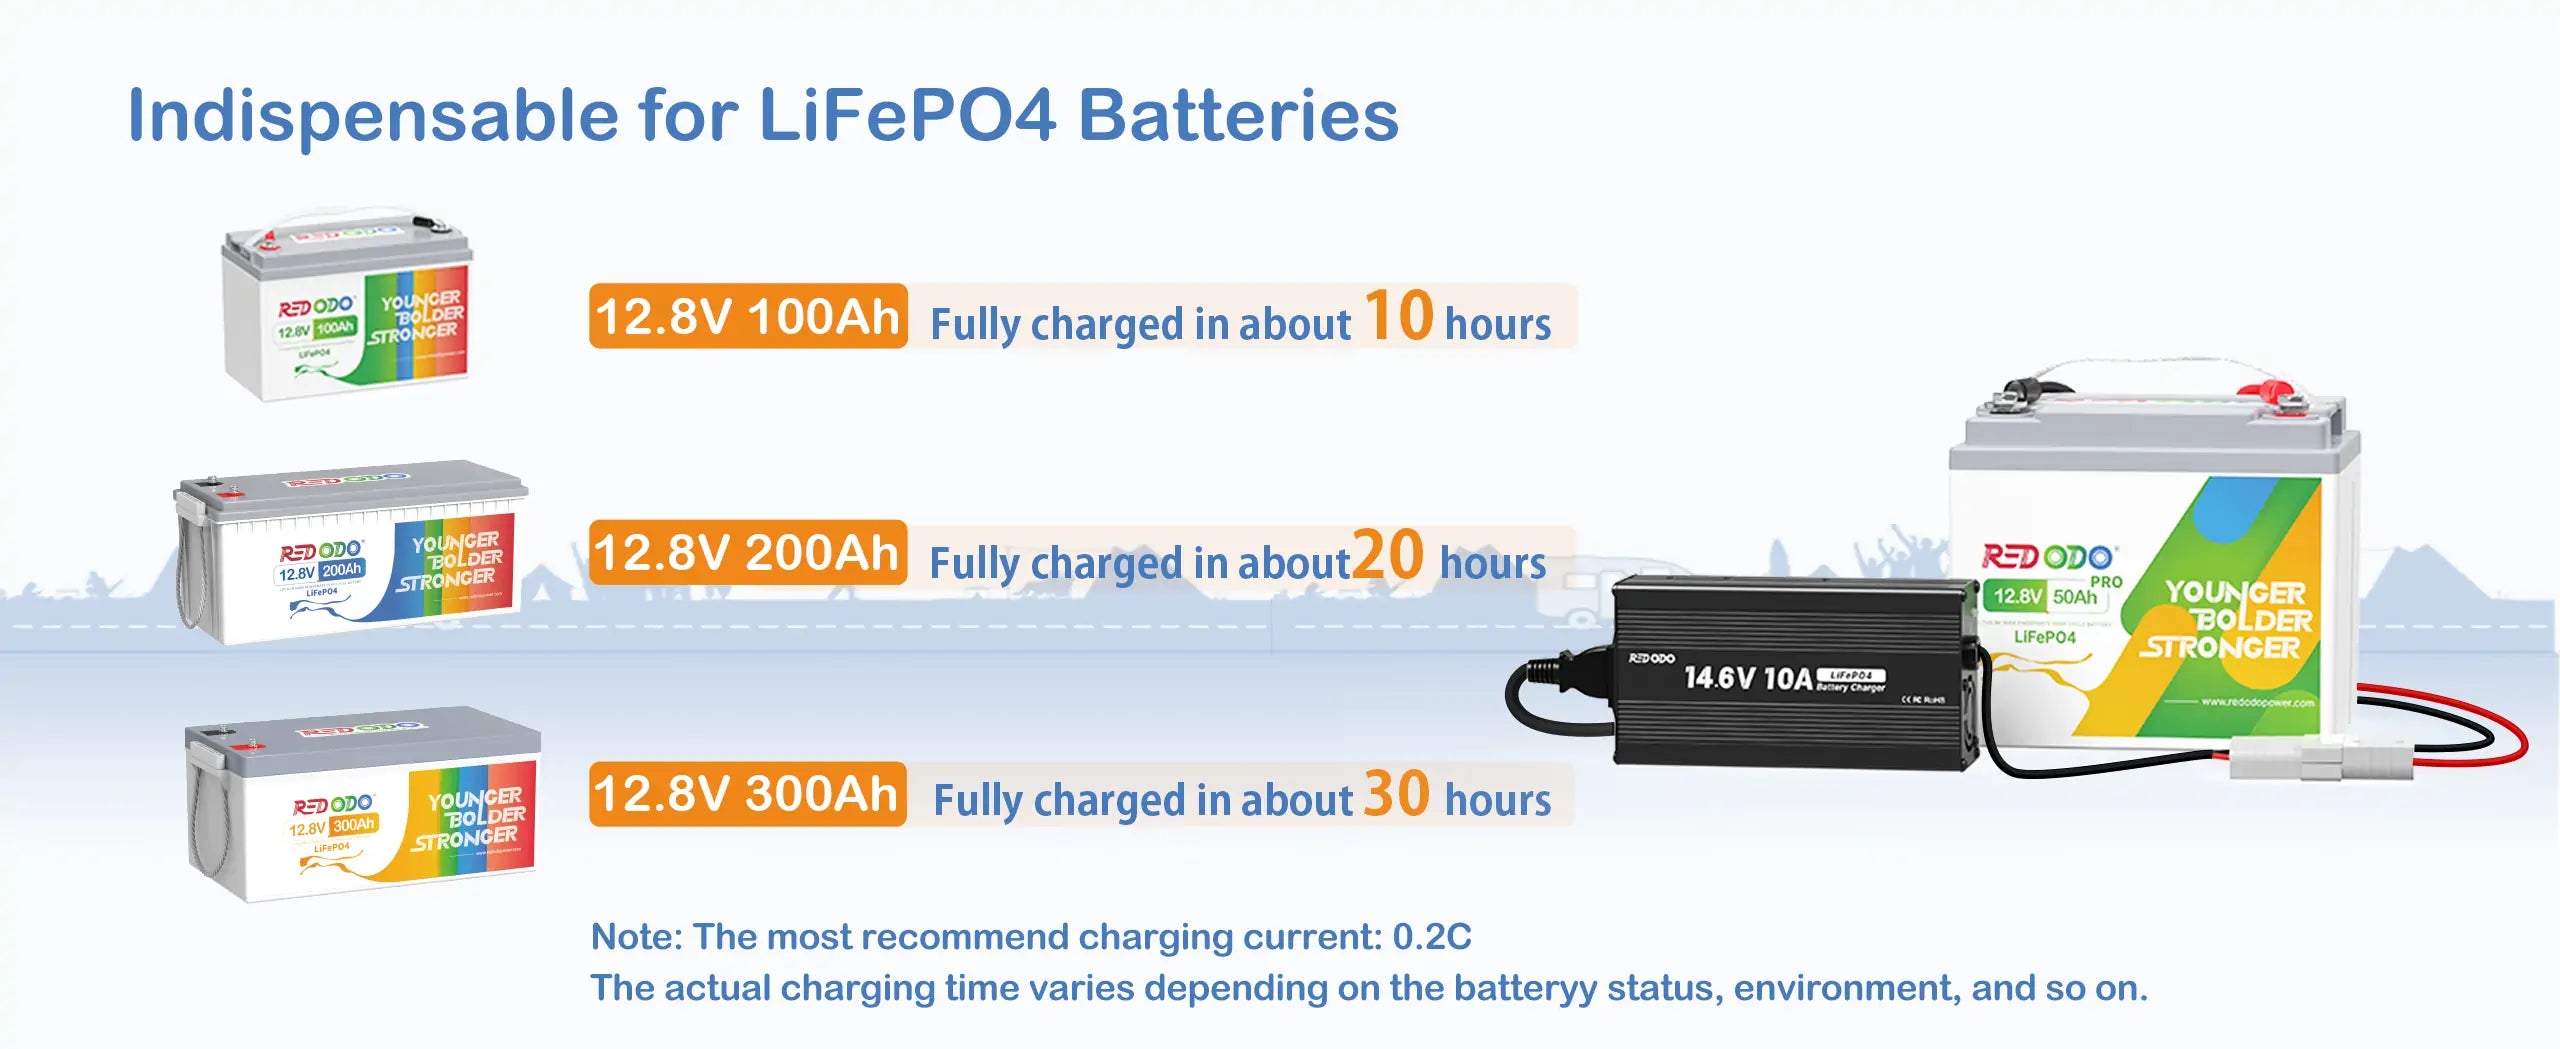 Redodo 14.6V 10A lifepo4 battery chargers